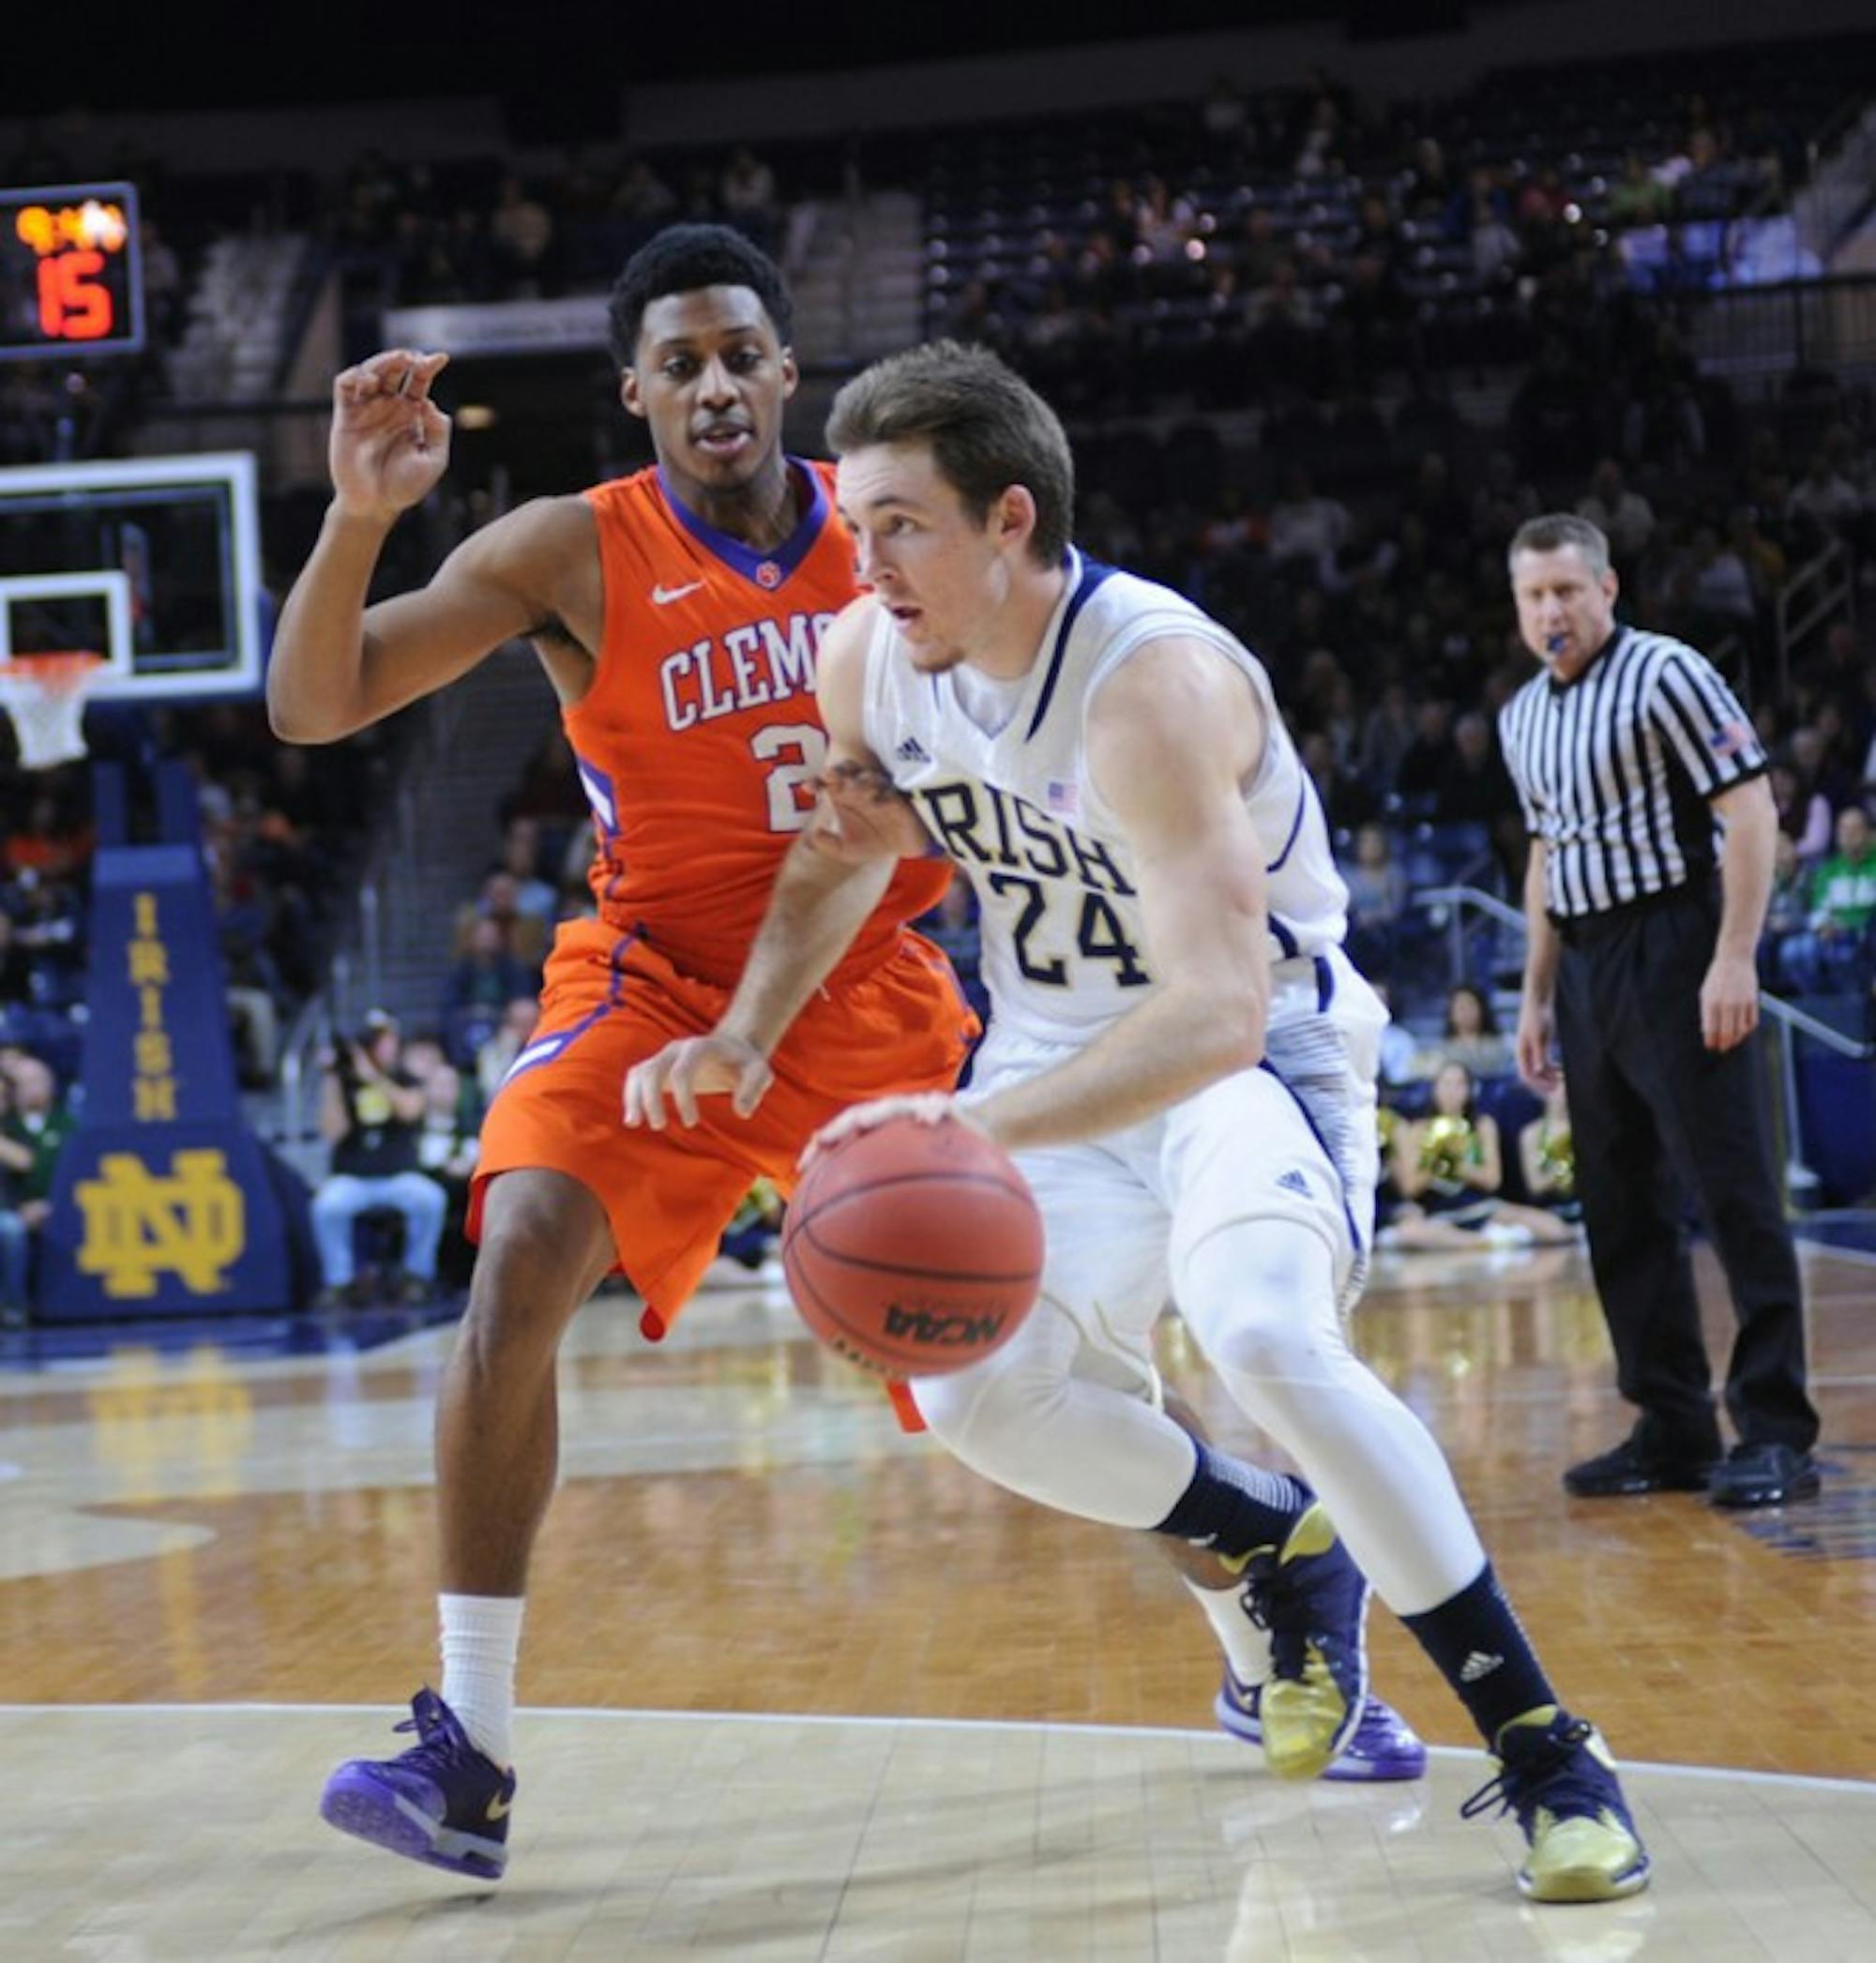 Irish junior forward Pat Connaughton drives to the basket during Notre Dame's 68-64 win against Clemson on Feb. 11.